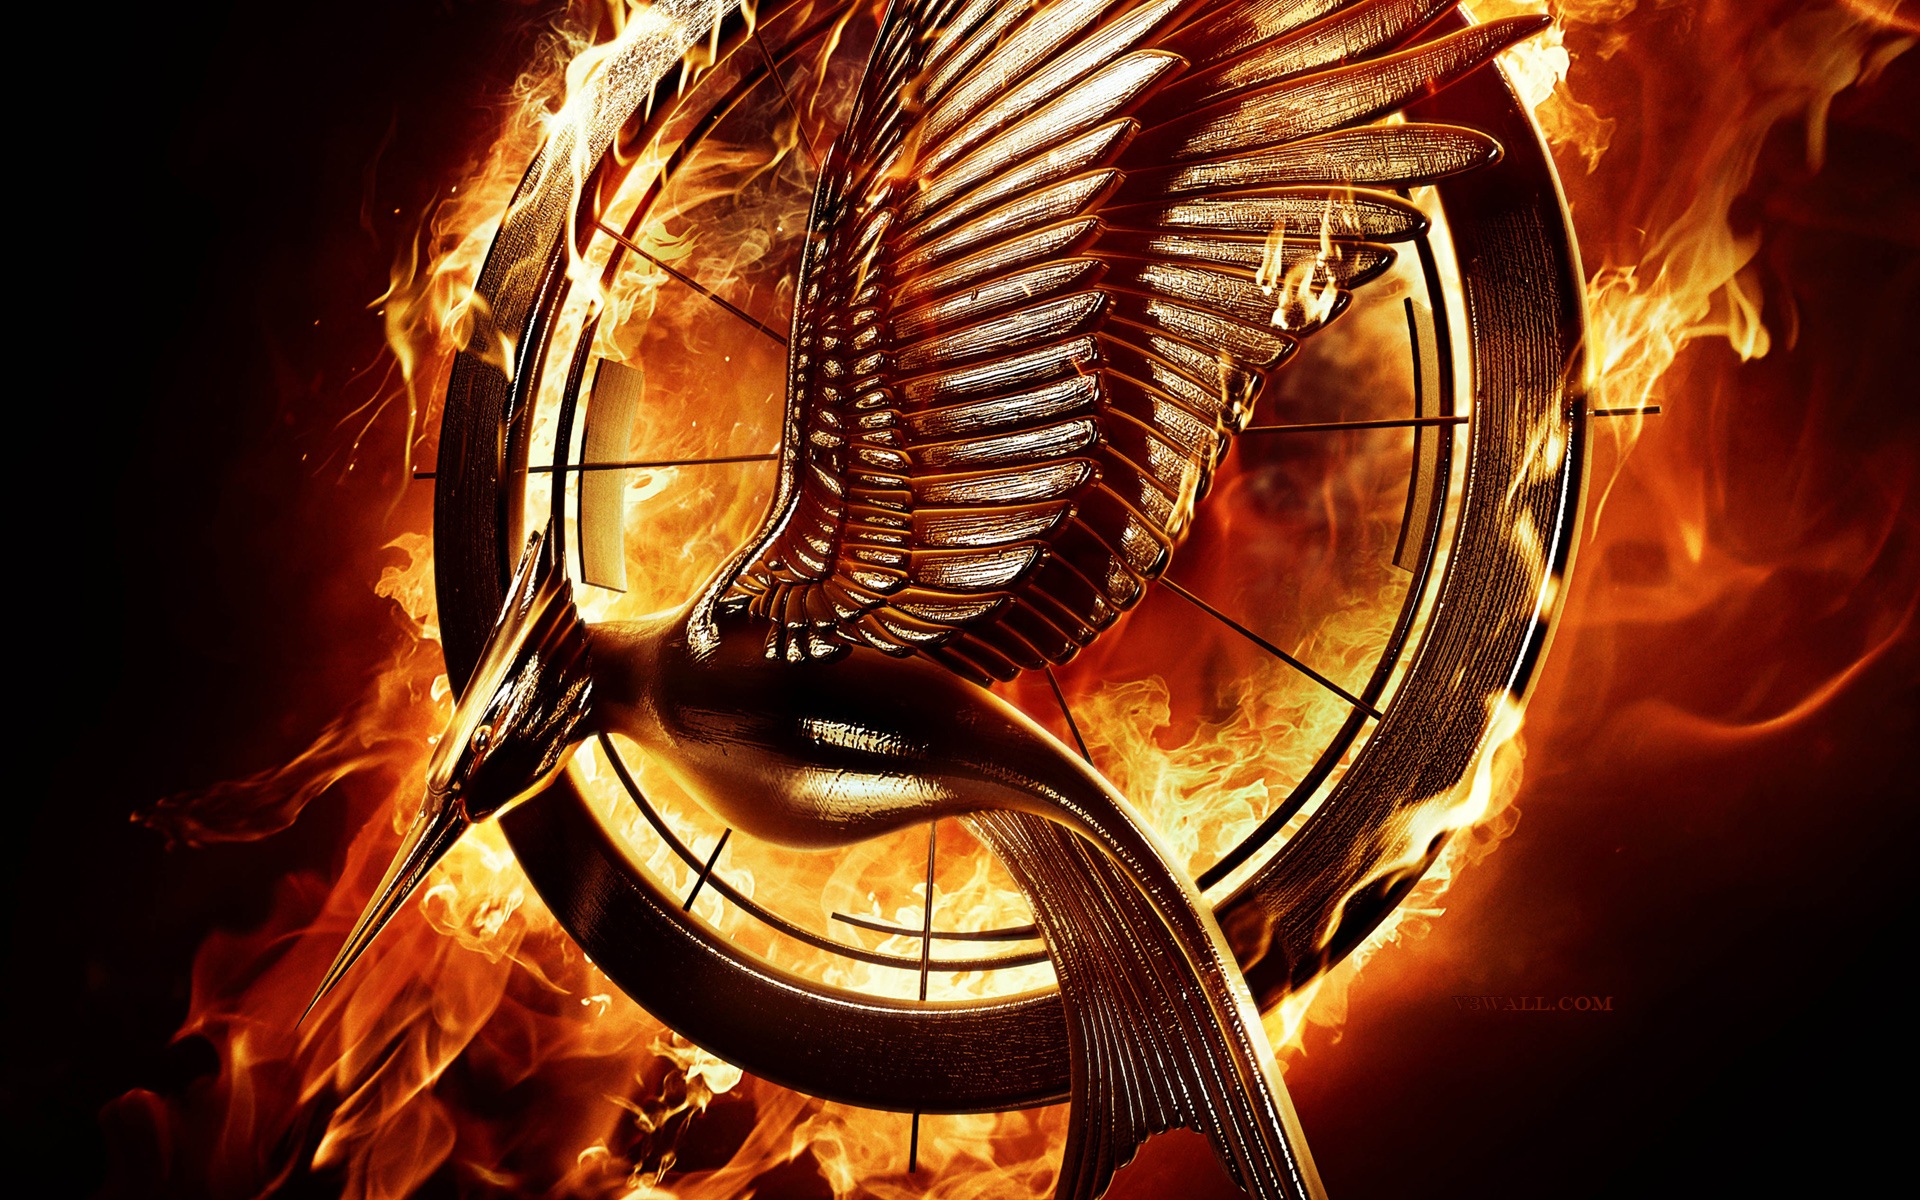 The Hunger Games: Catching Fire wallpapers HD #17 - 1920x1200